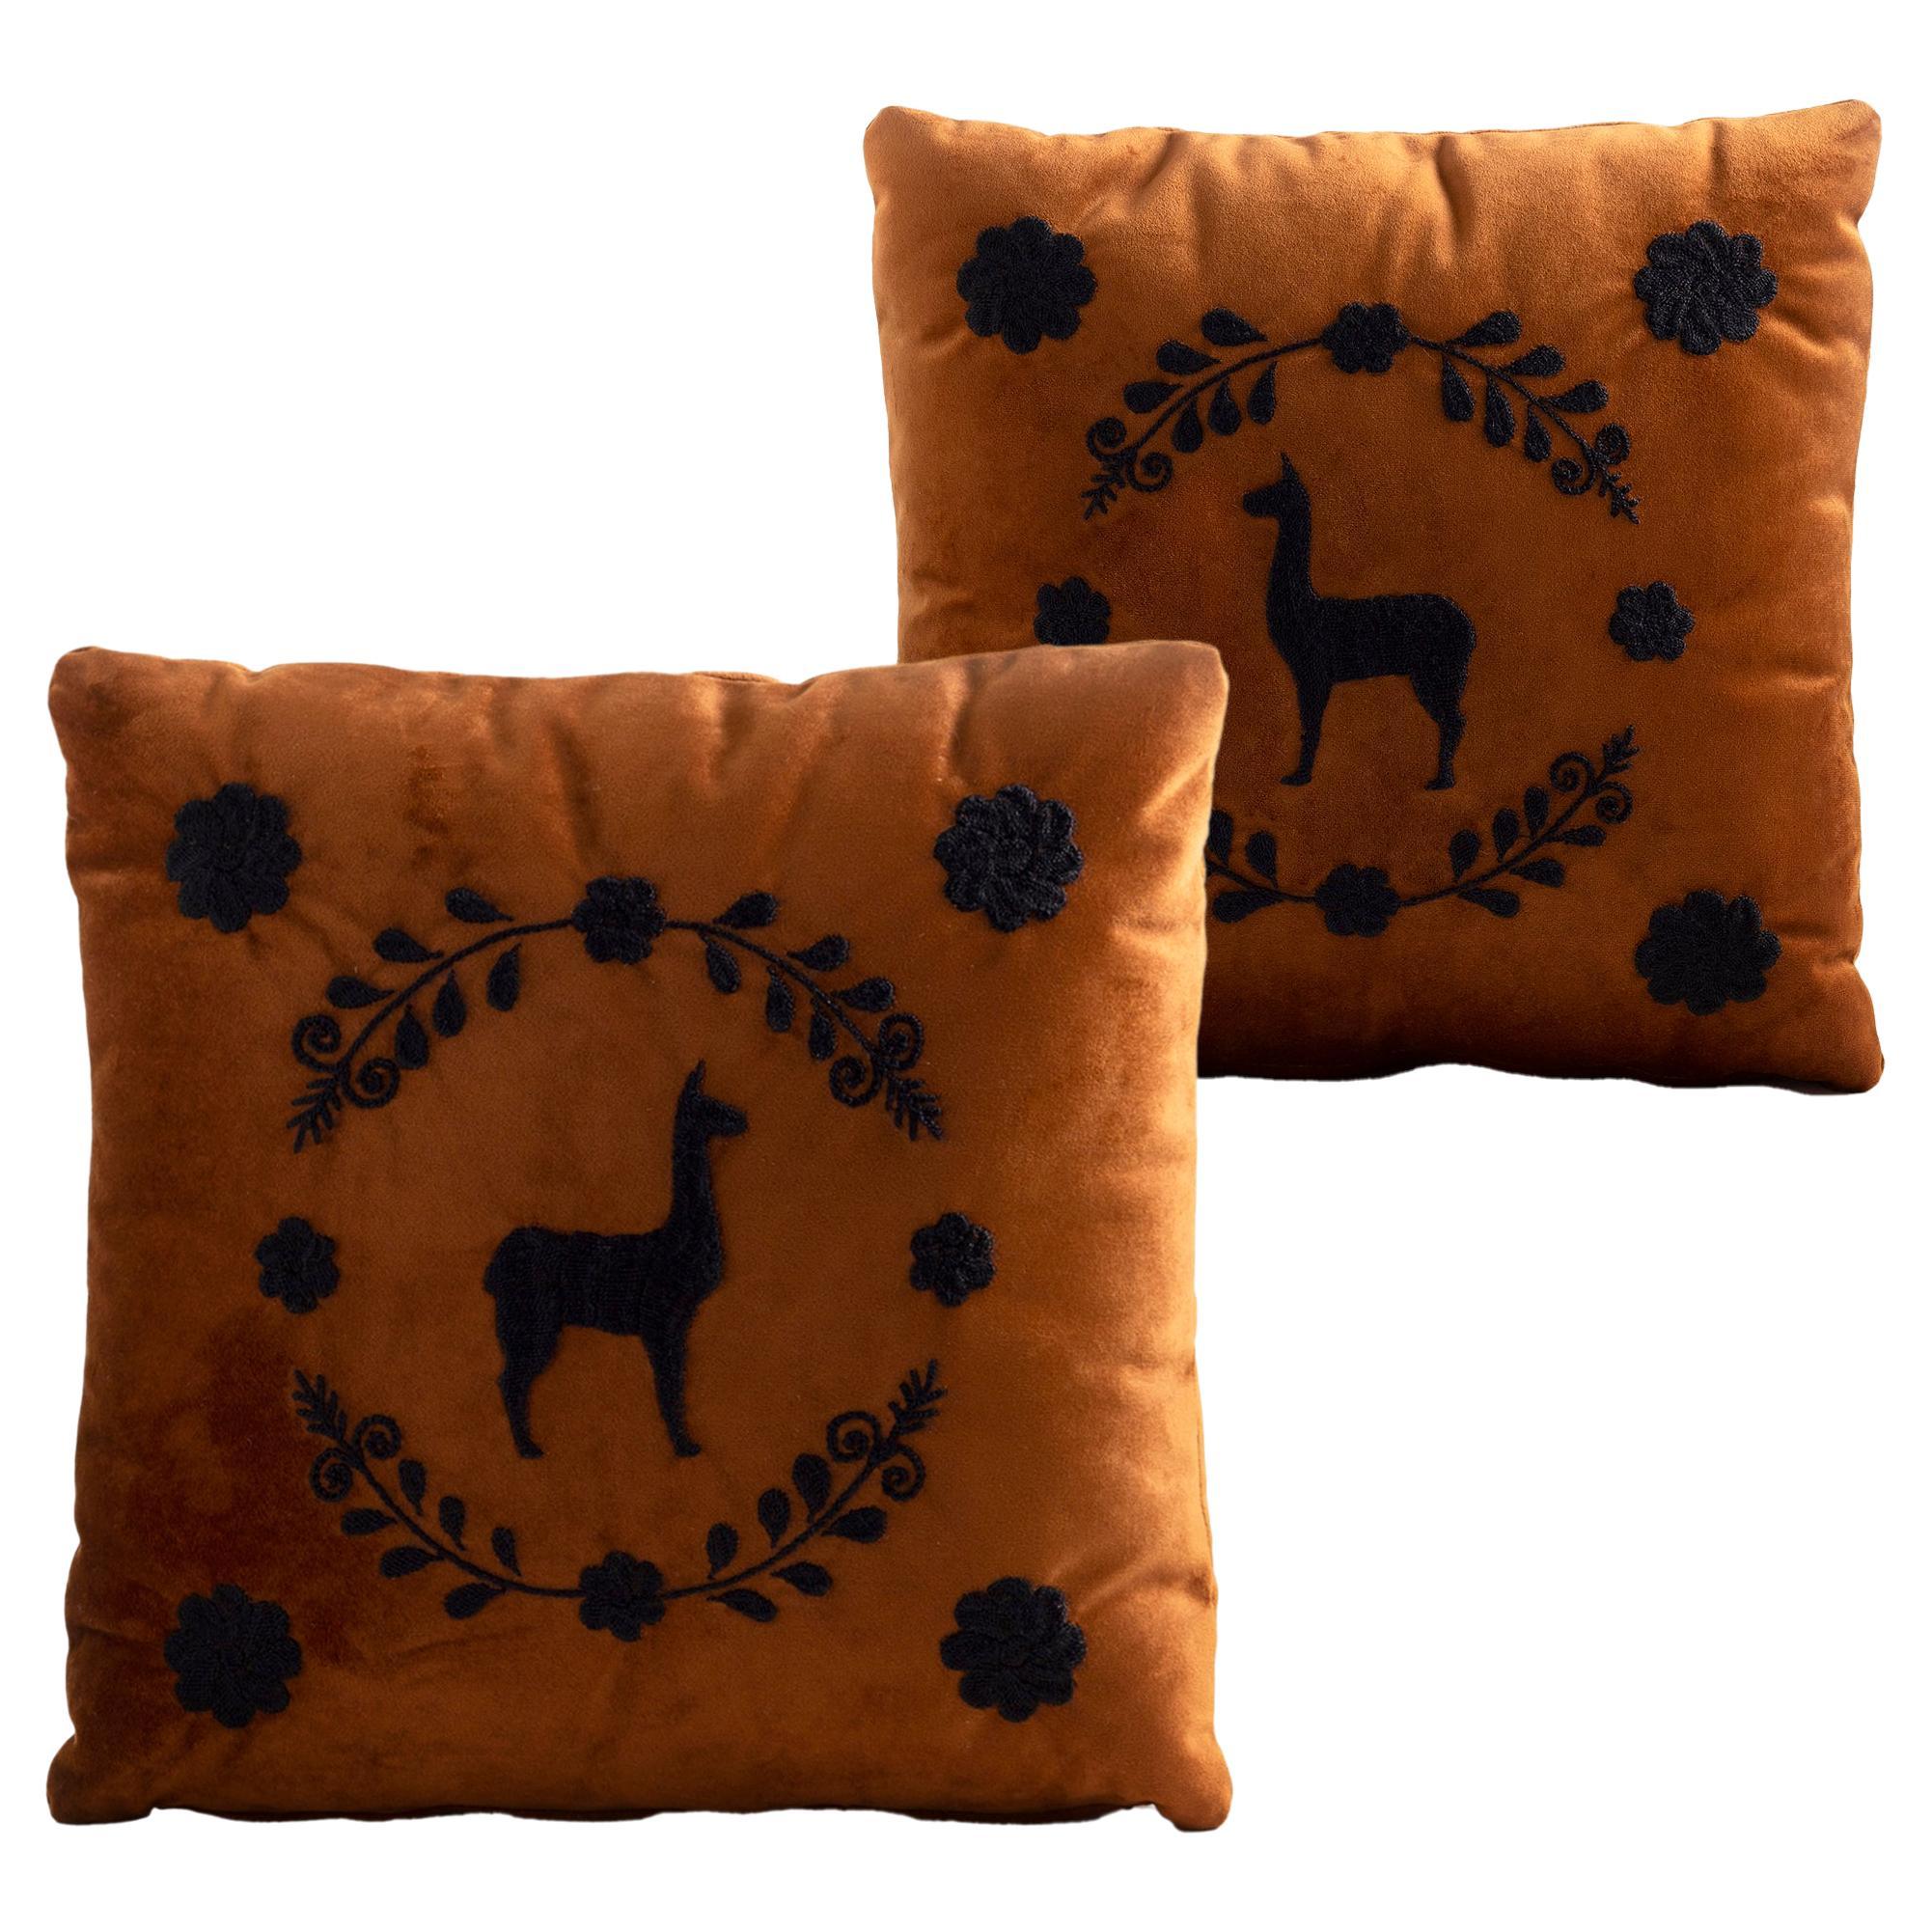 LLAMA Hand Embroidered Decorative Pillows Terracota Velvet by ANDEAN, Set of 2 For Sale